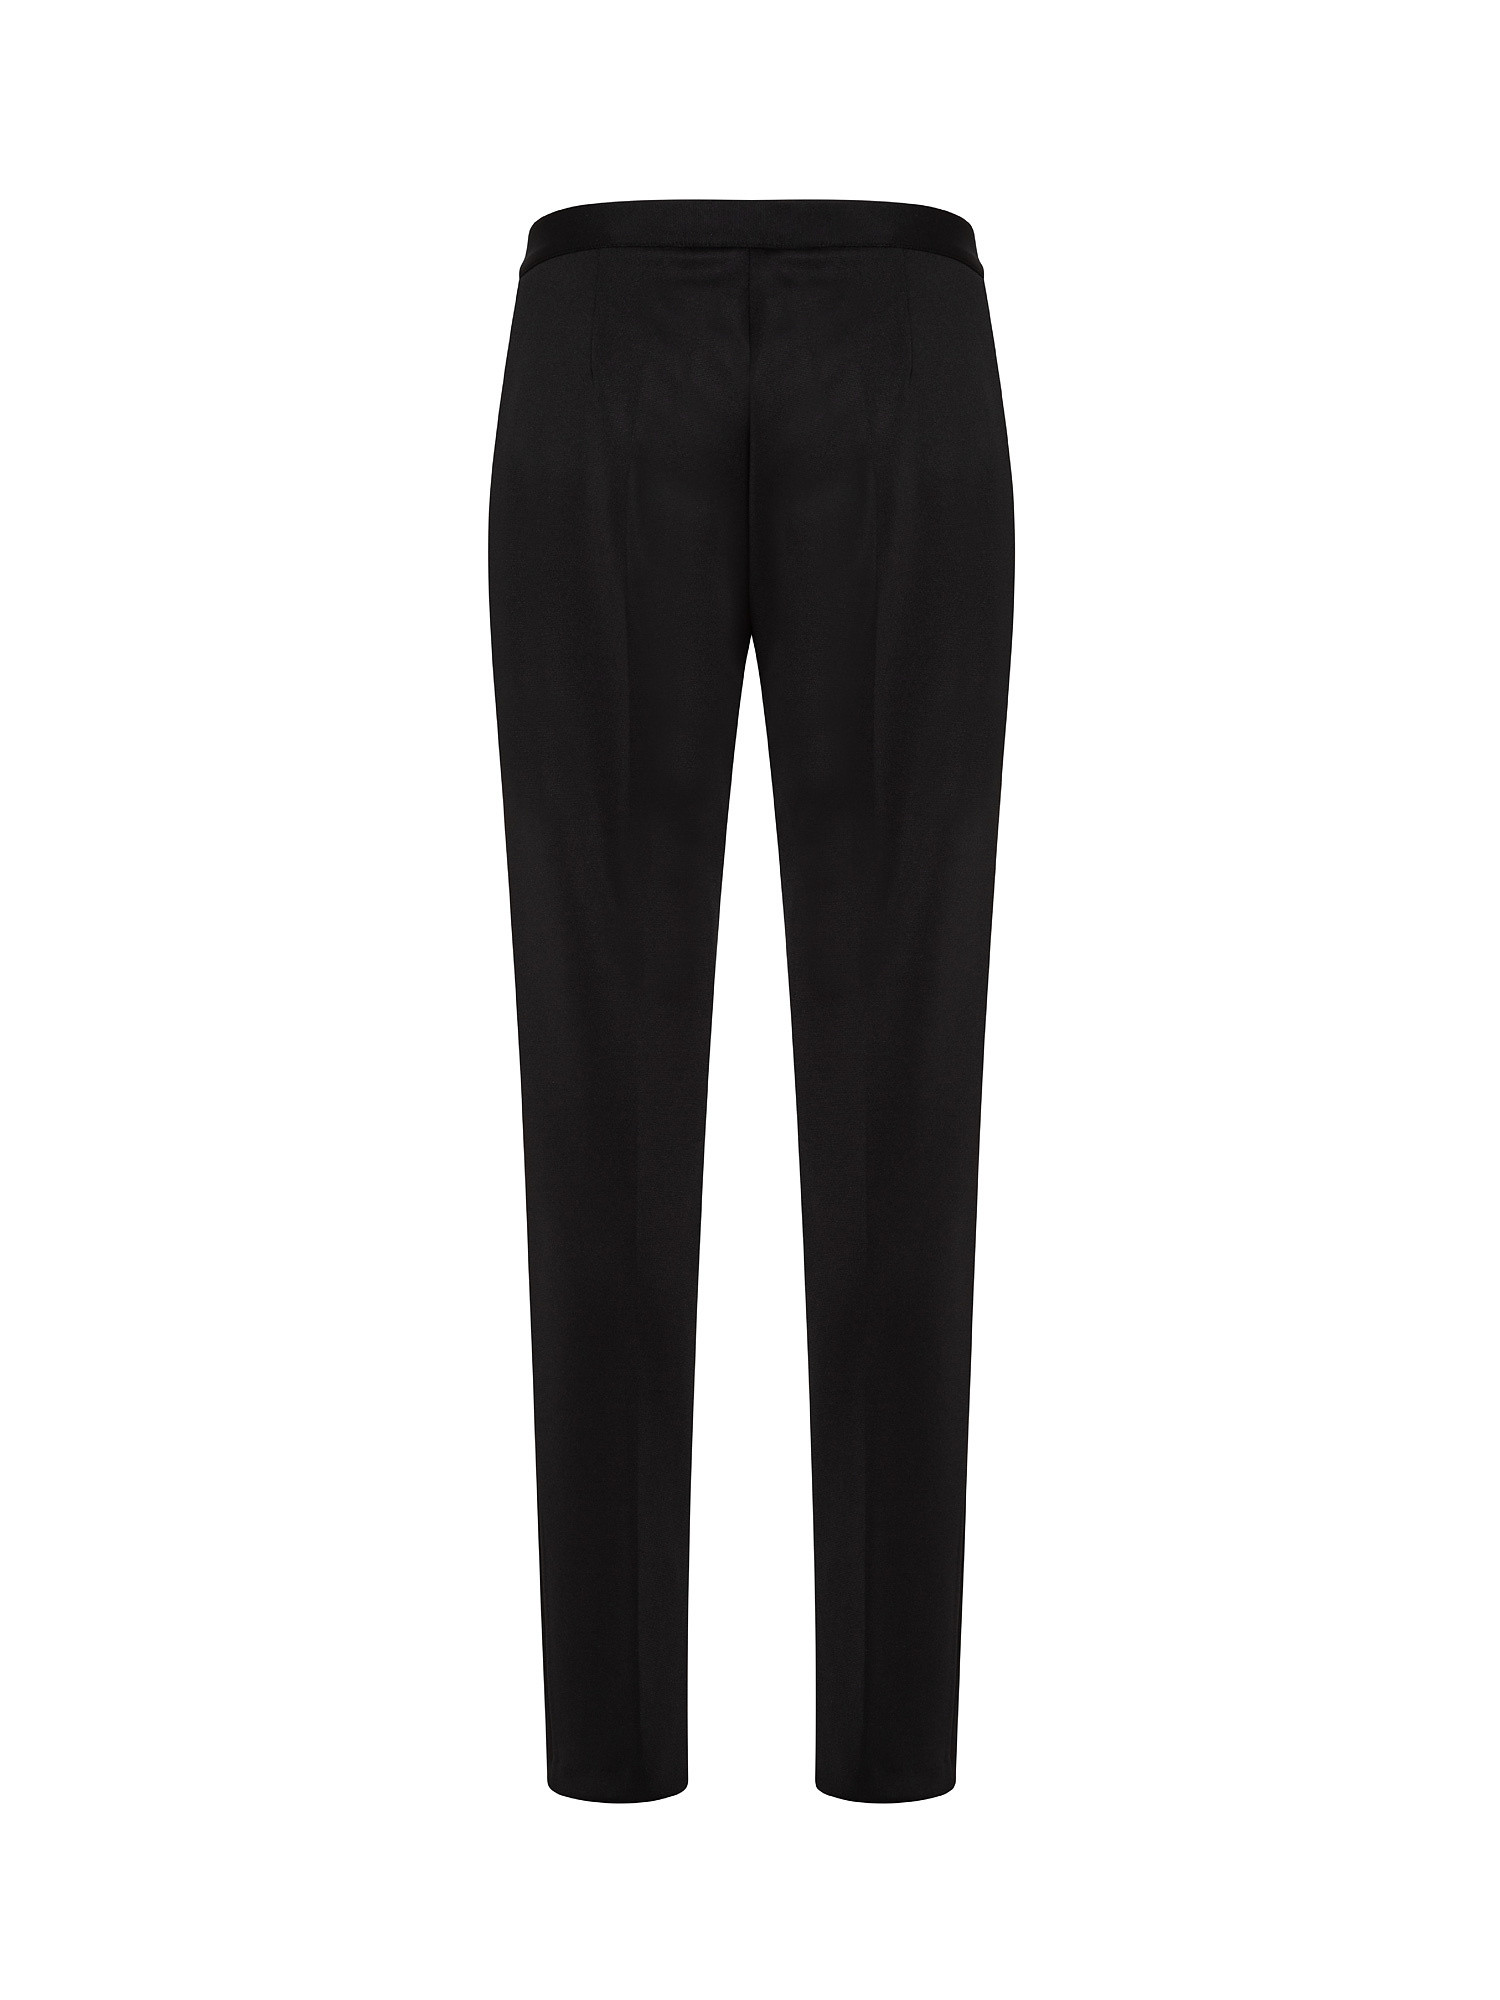 Trousers with crease, Black, large image number 1